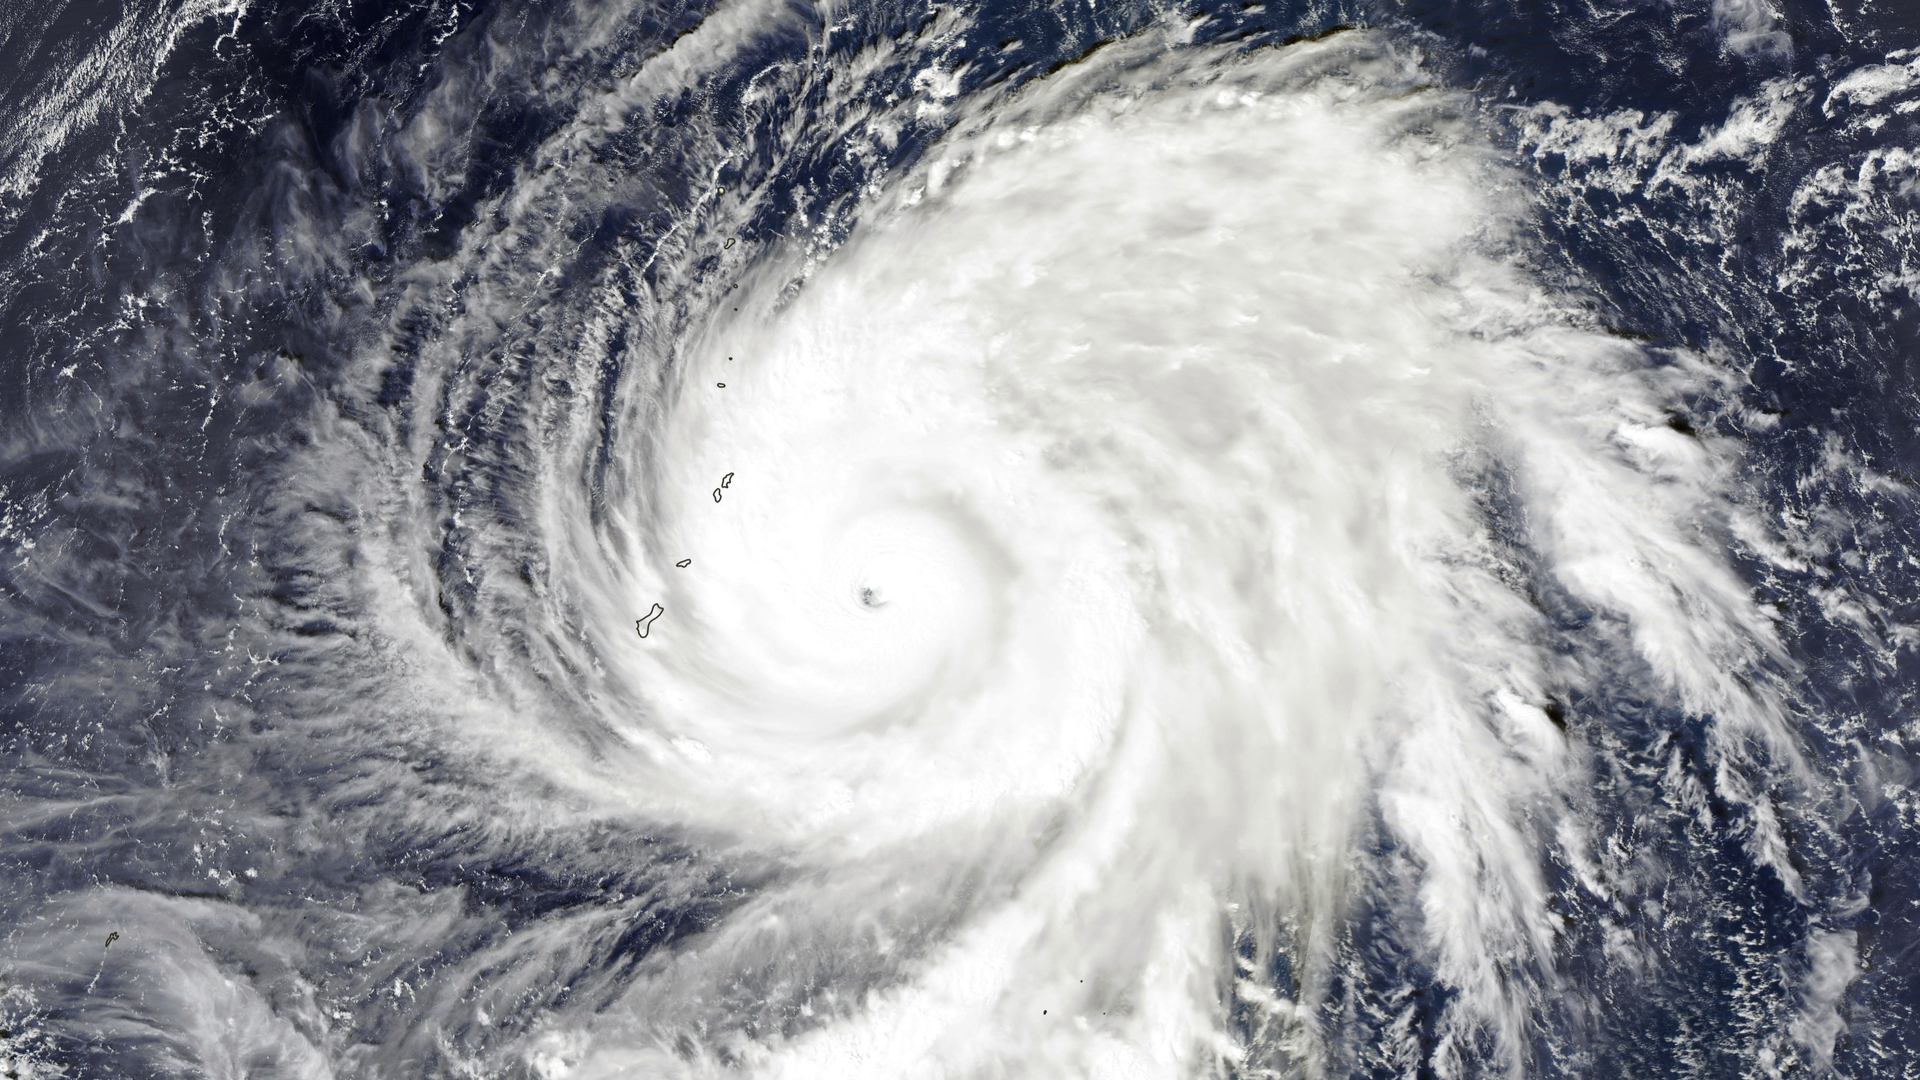 An aerial view of Typhoon Yutu showing the eye of the cyclone and swirling clouds